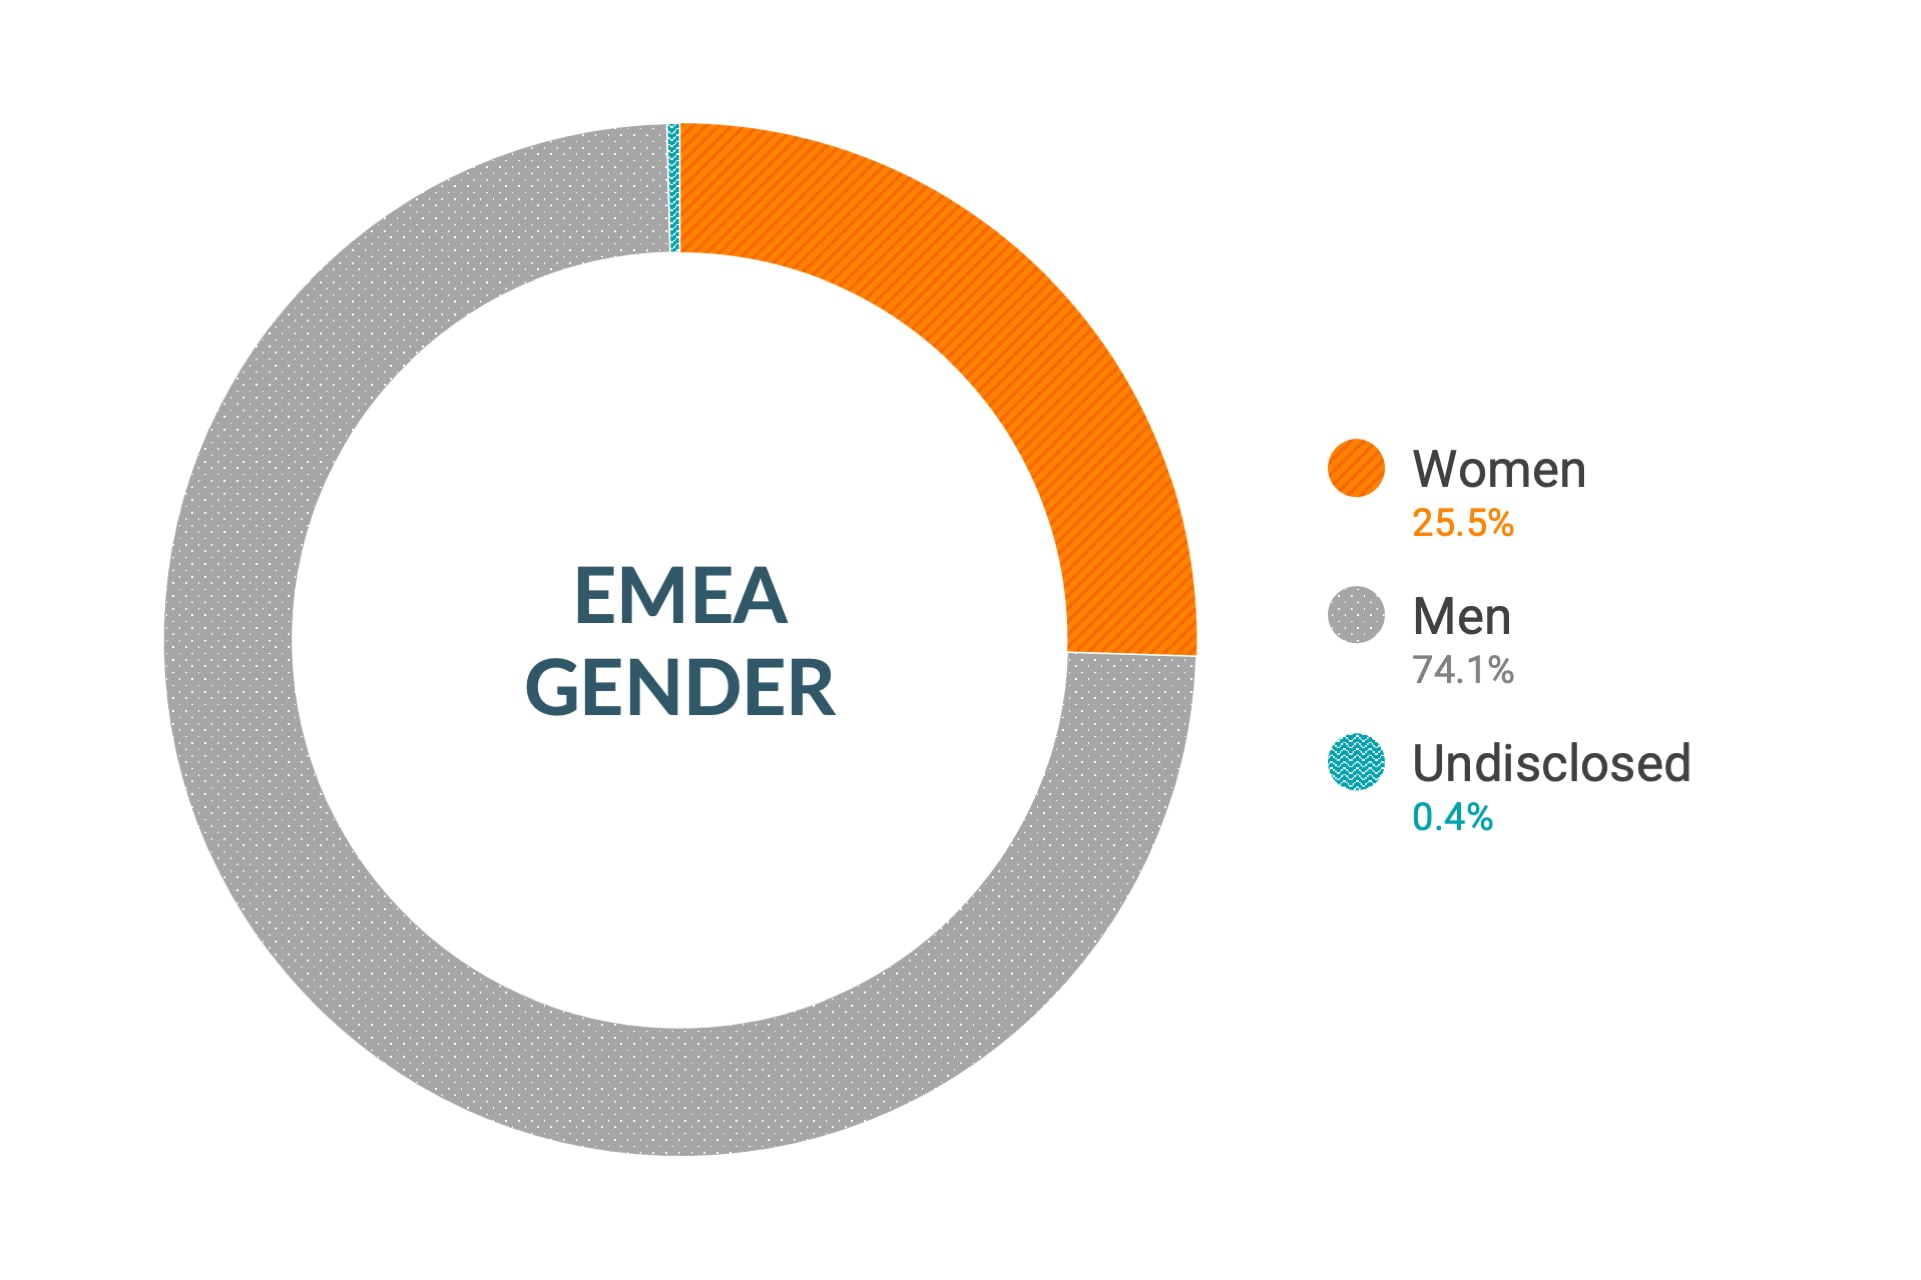 Cloudera Diversity and Inclusion data for EMEA Gender: Women 21%, Men 78%, Undisclosed 1%